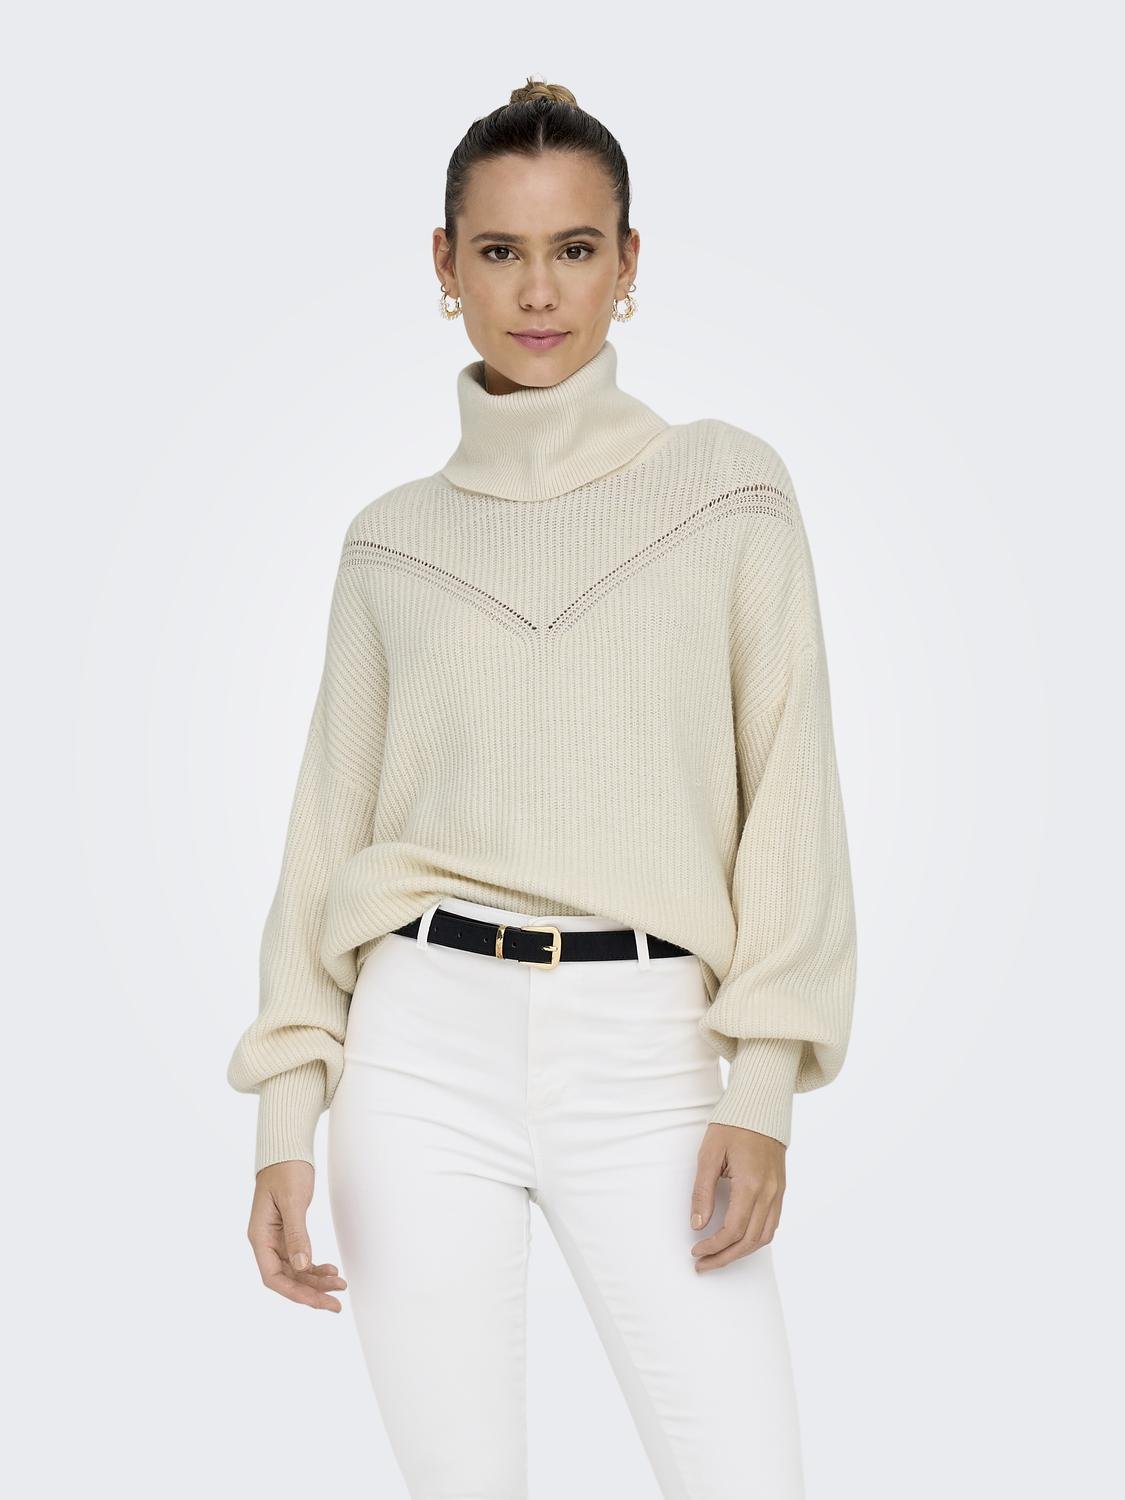 ONLY Roll neck Pullover -Whitecap Gray - 15294940